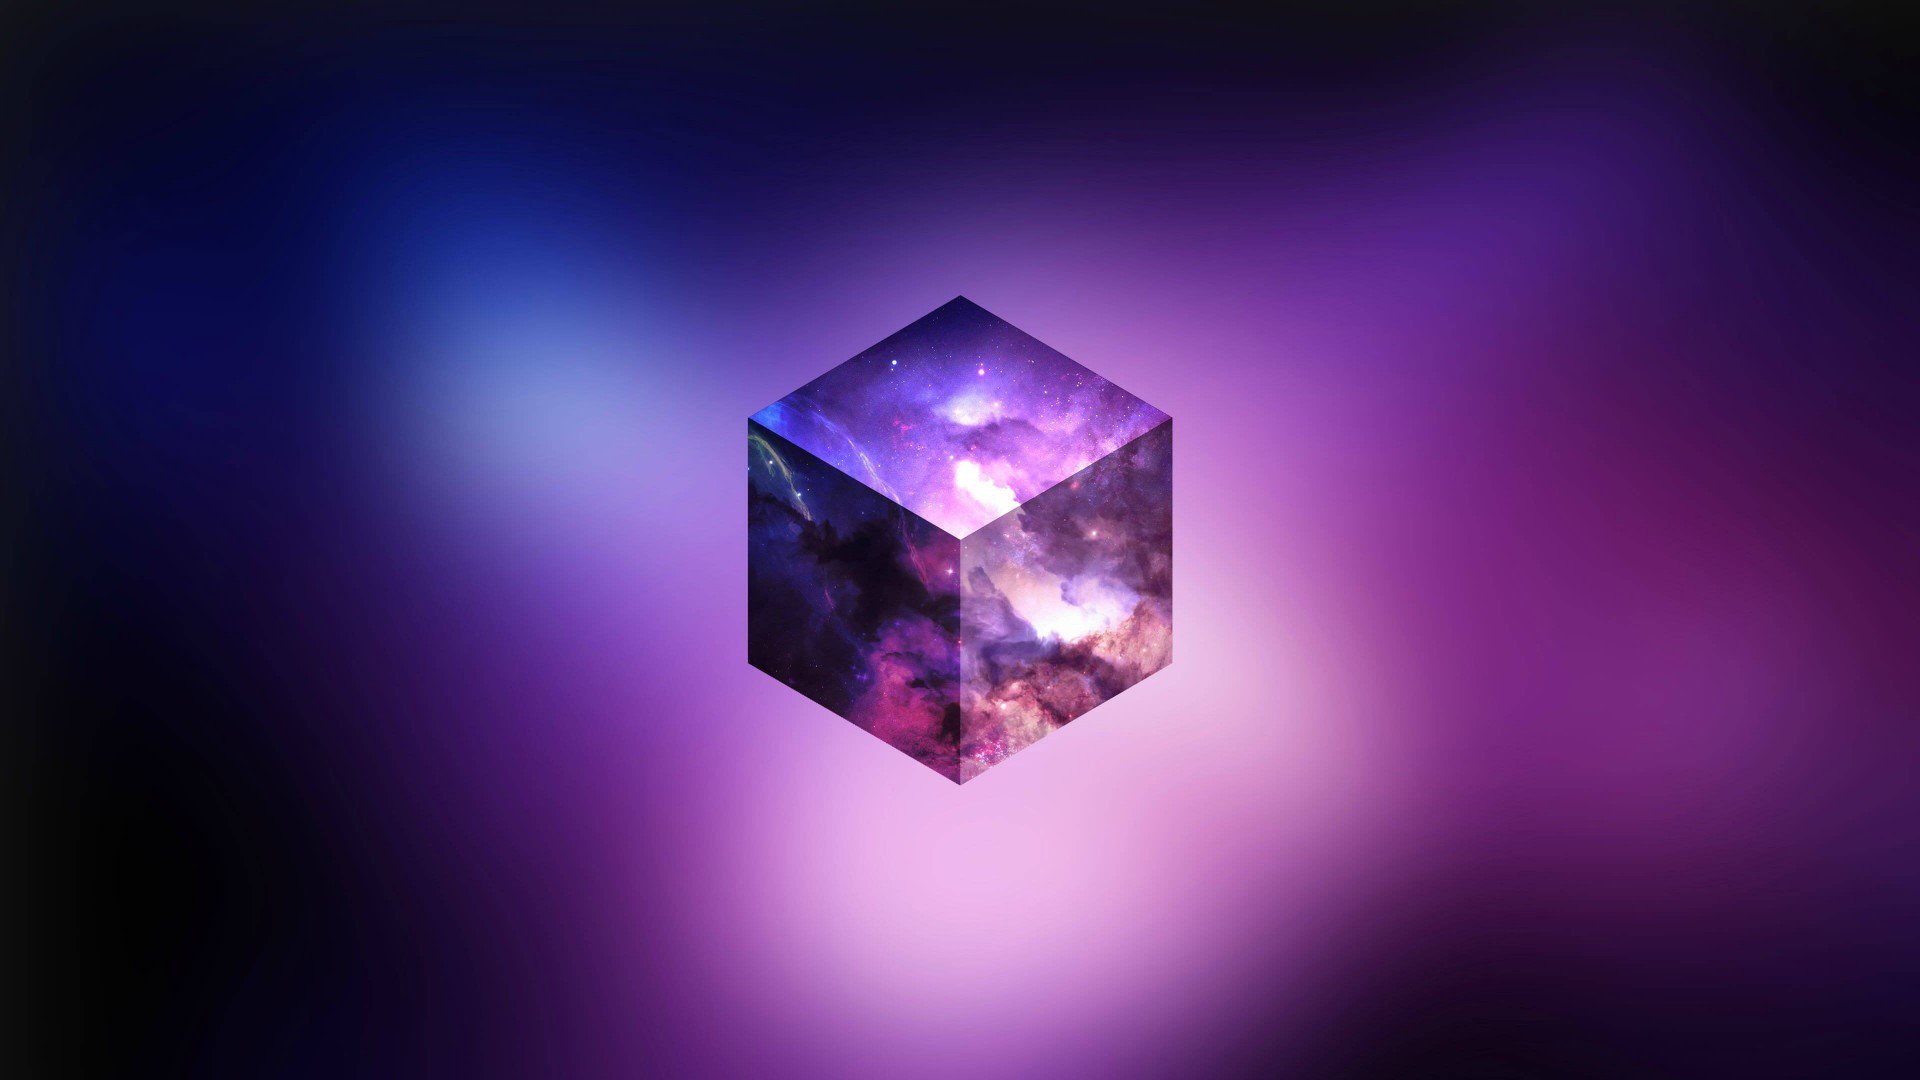 Cloudy Purple Sky In A Cube HD Wallpaper Background Image